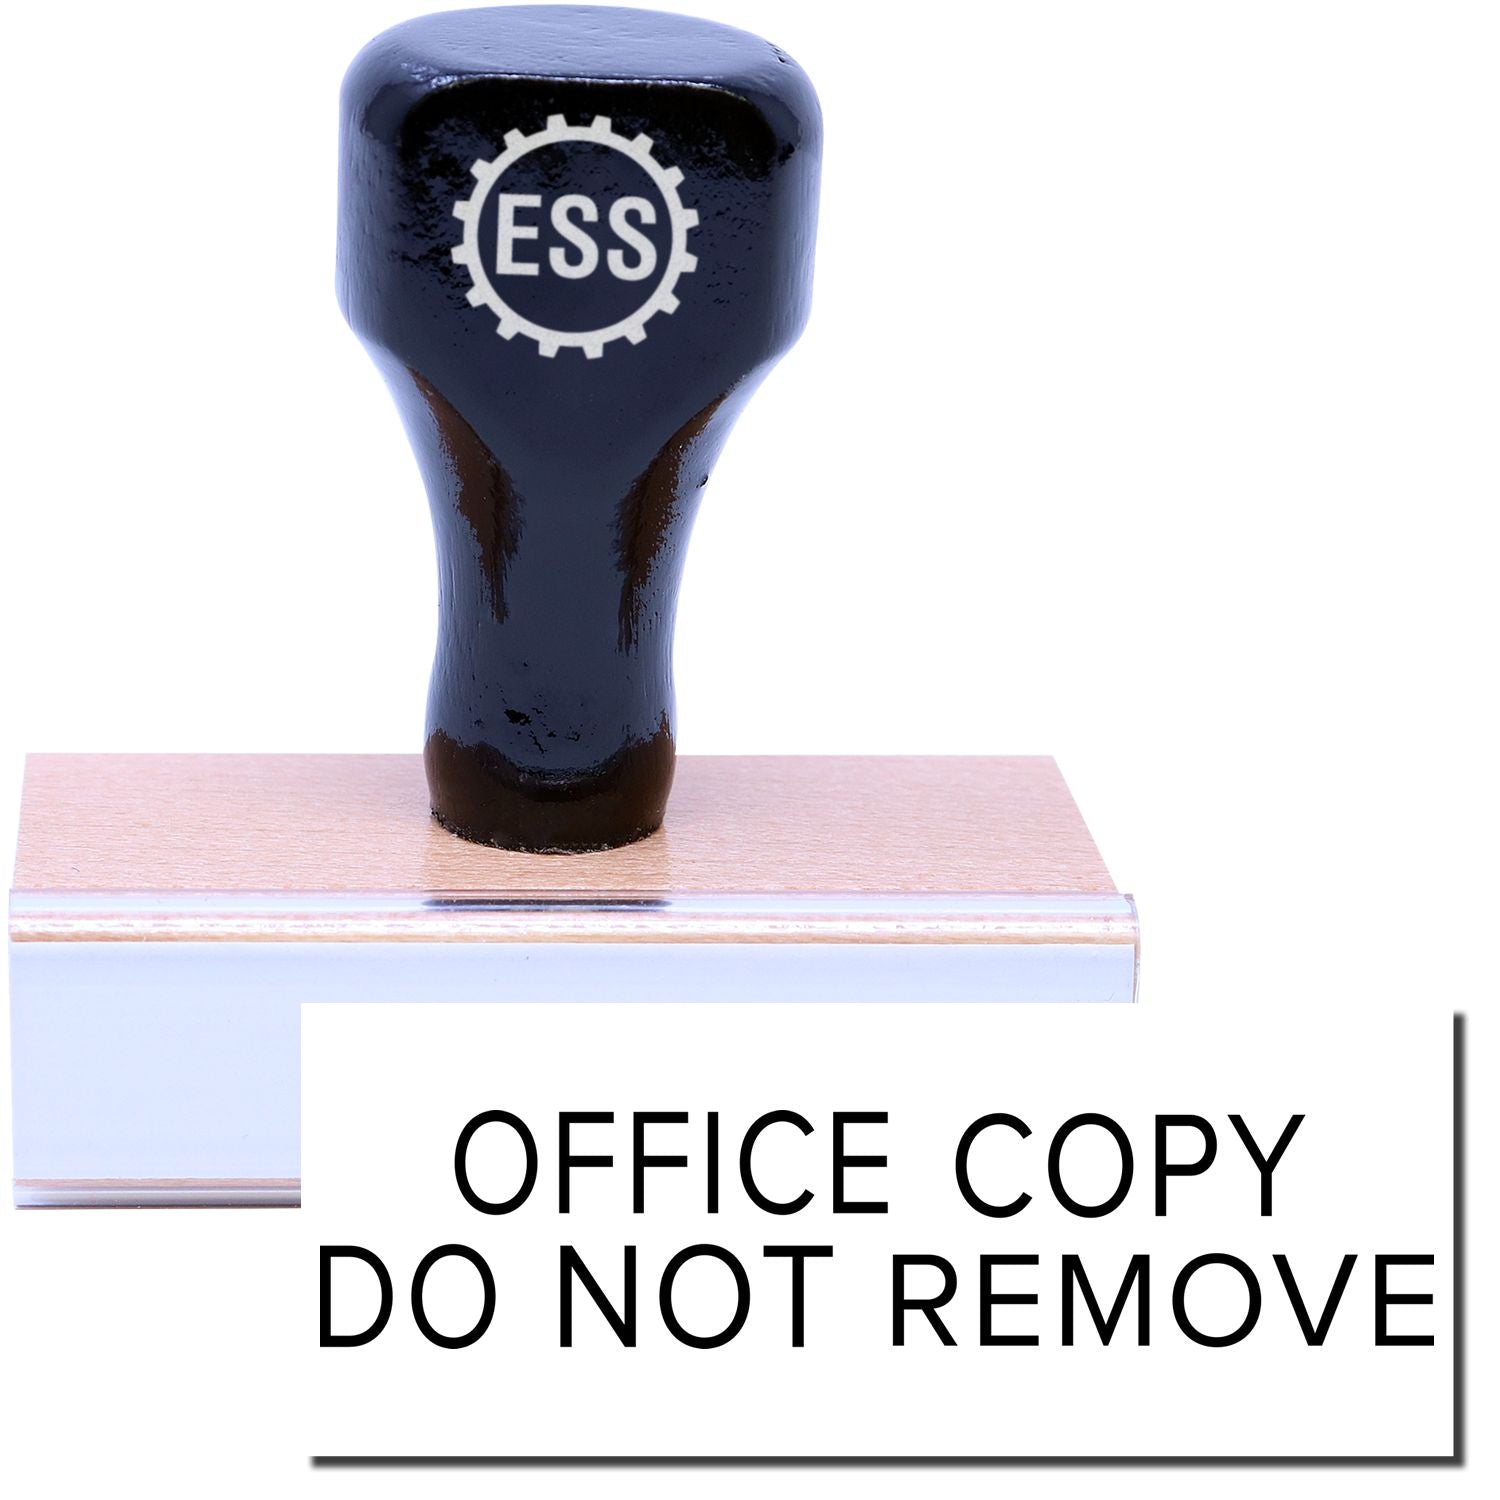 A stock office rubber stamp with a stamped image showing how the text "OFFICE COPY DO NOT REMOVE" in a large narrow font is displayed after stamping.